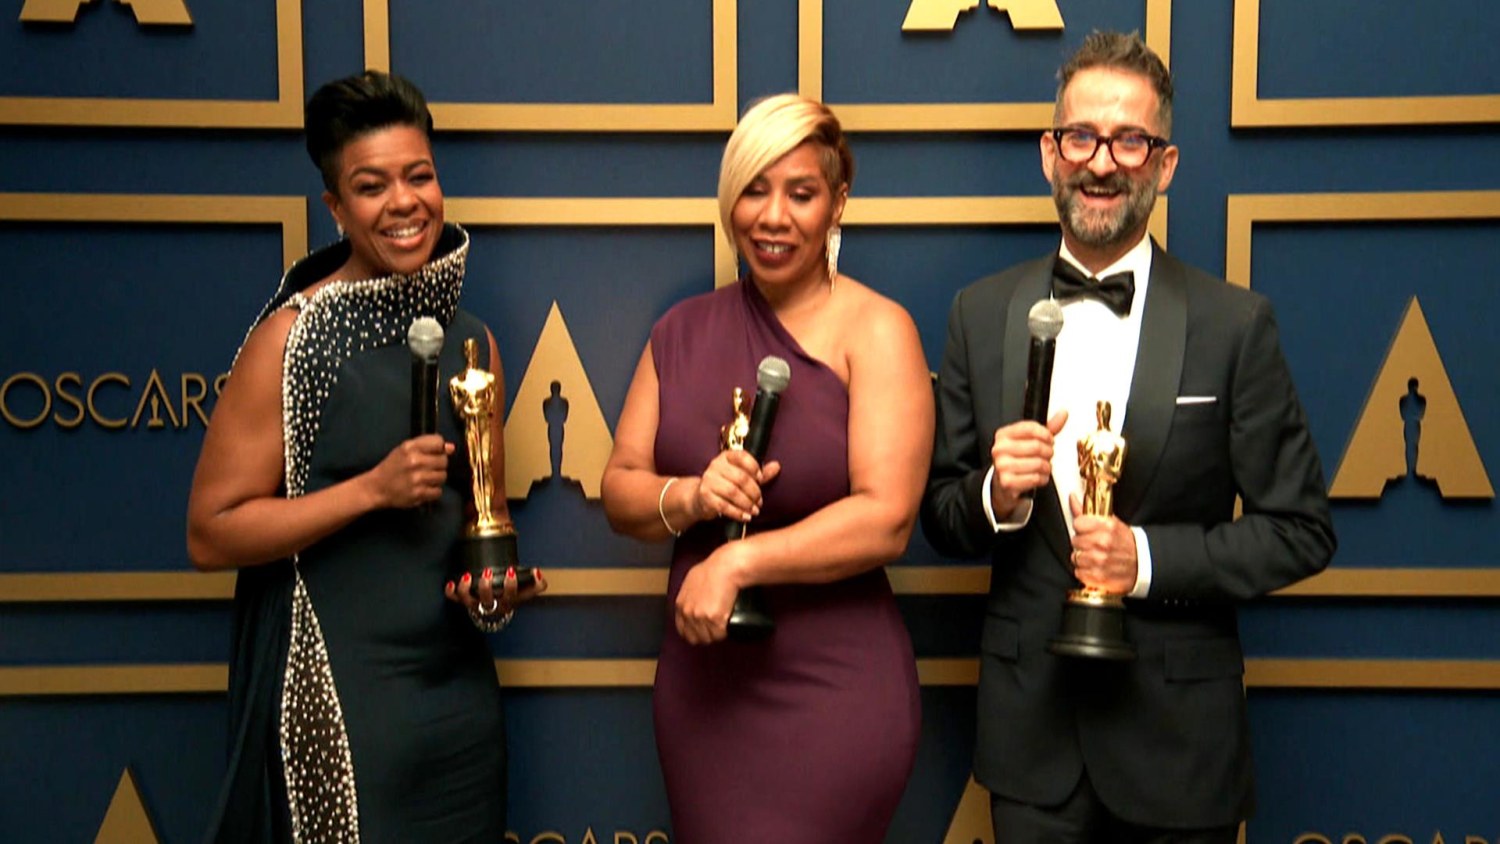 Oscars 2021: 11 best Oscar moments of the evening - TODAY